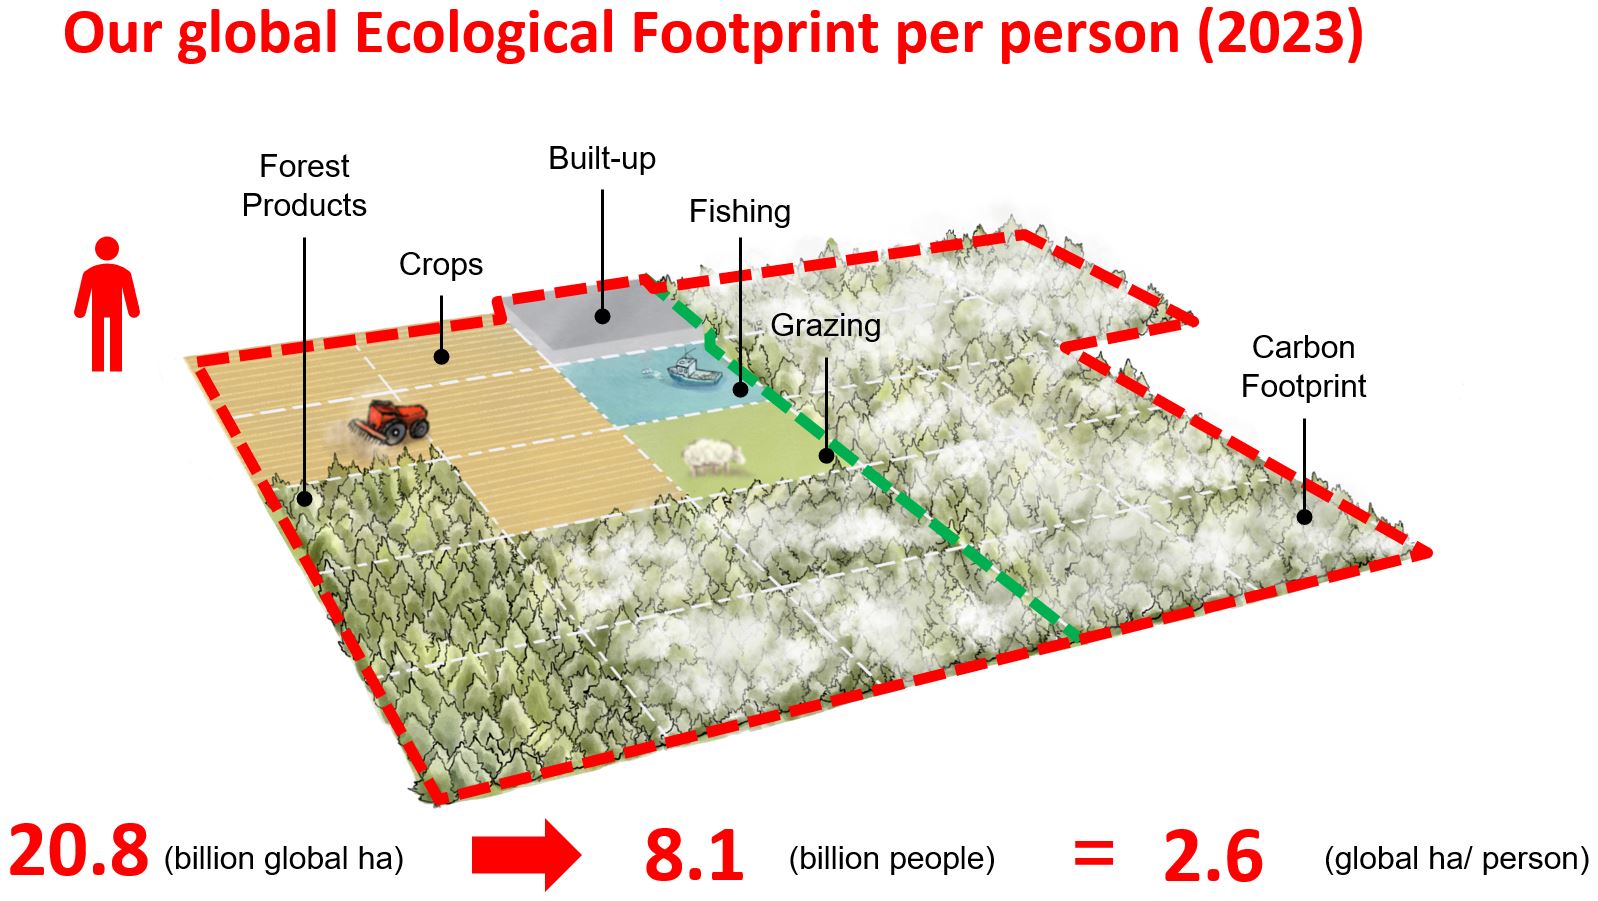 The Ecological Footprint represents the biologically productive space needed to regenerate what is being consumed.